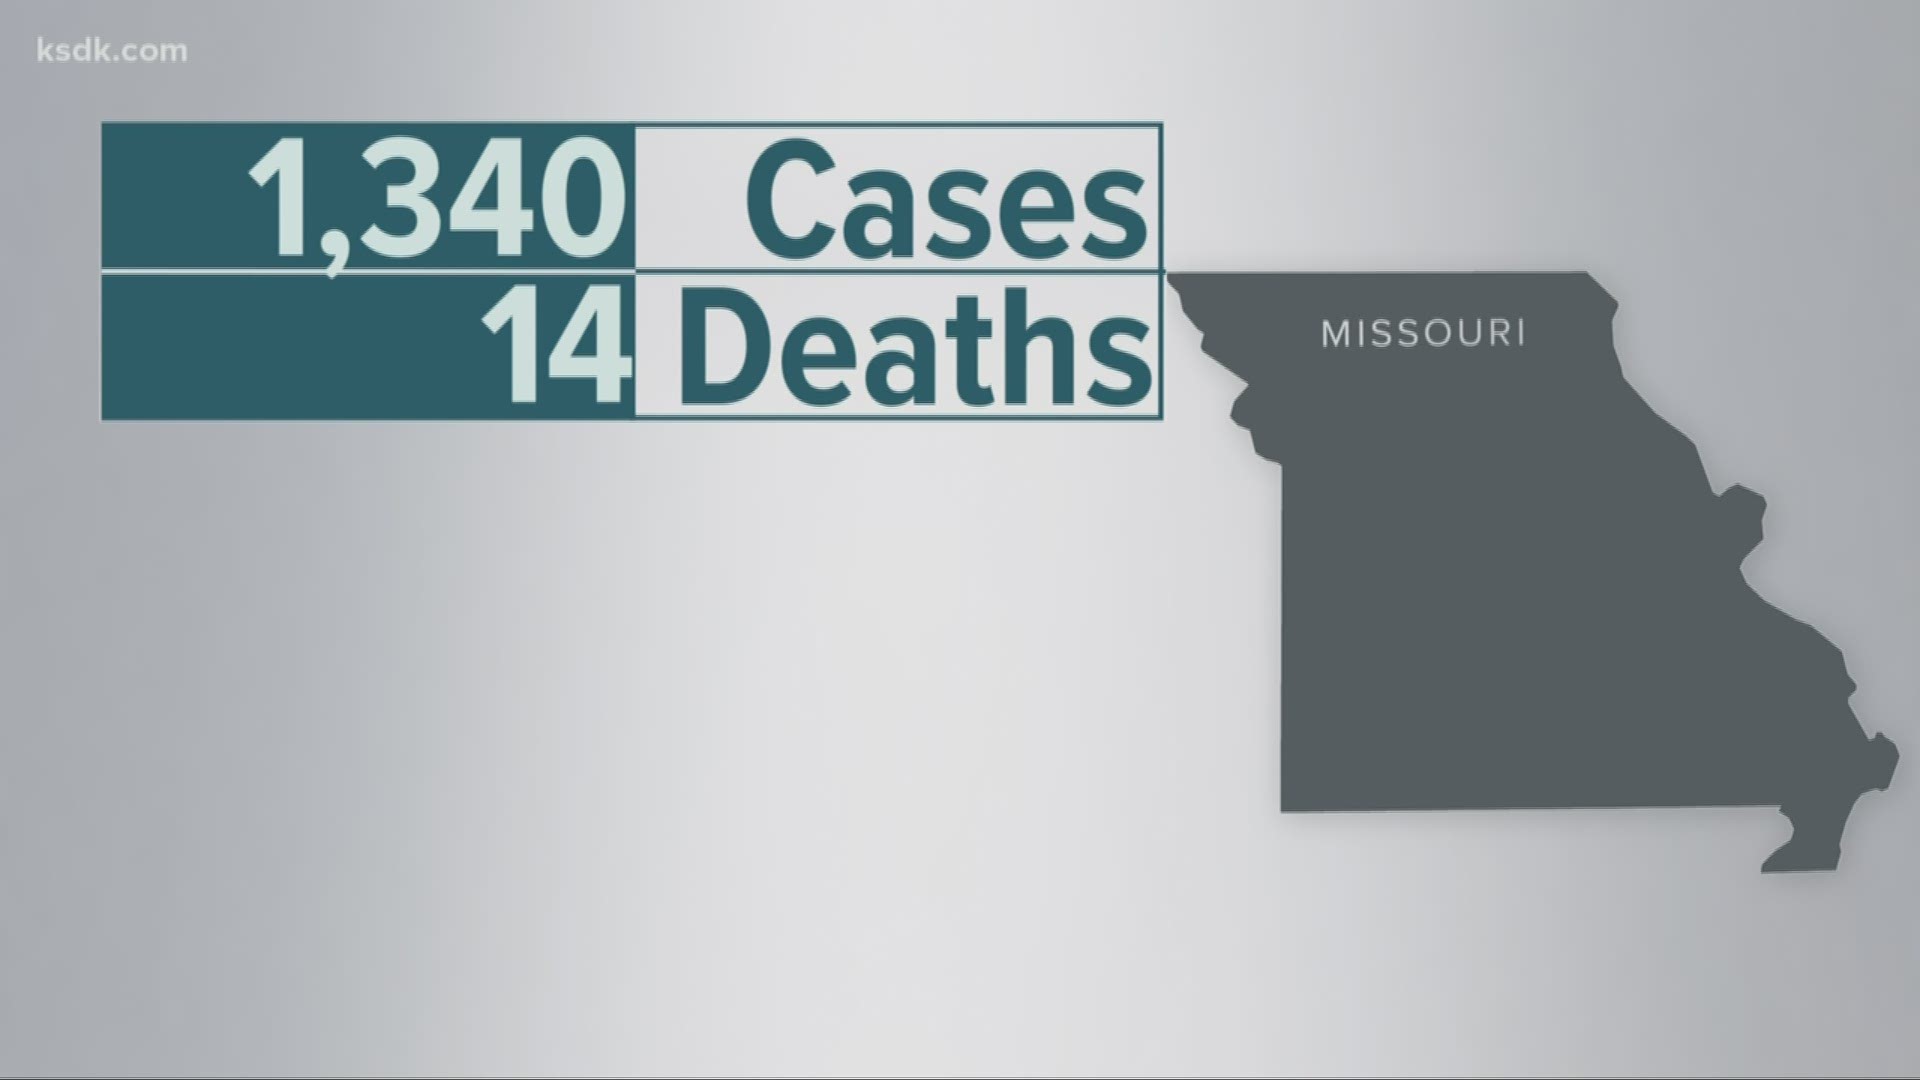 New cases and deaths were reported in Missouri and Illinois. Also, a Schnucks employee in St. Louis County tested positive for COVID-19.